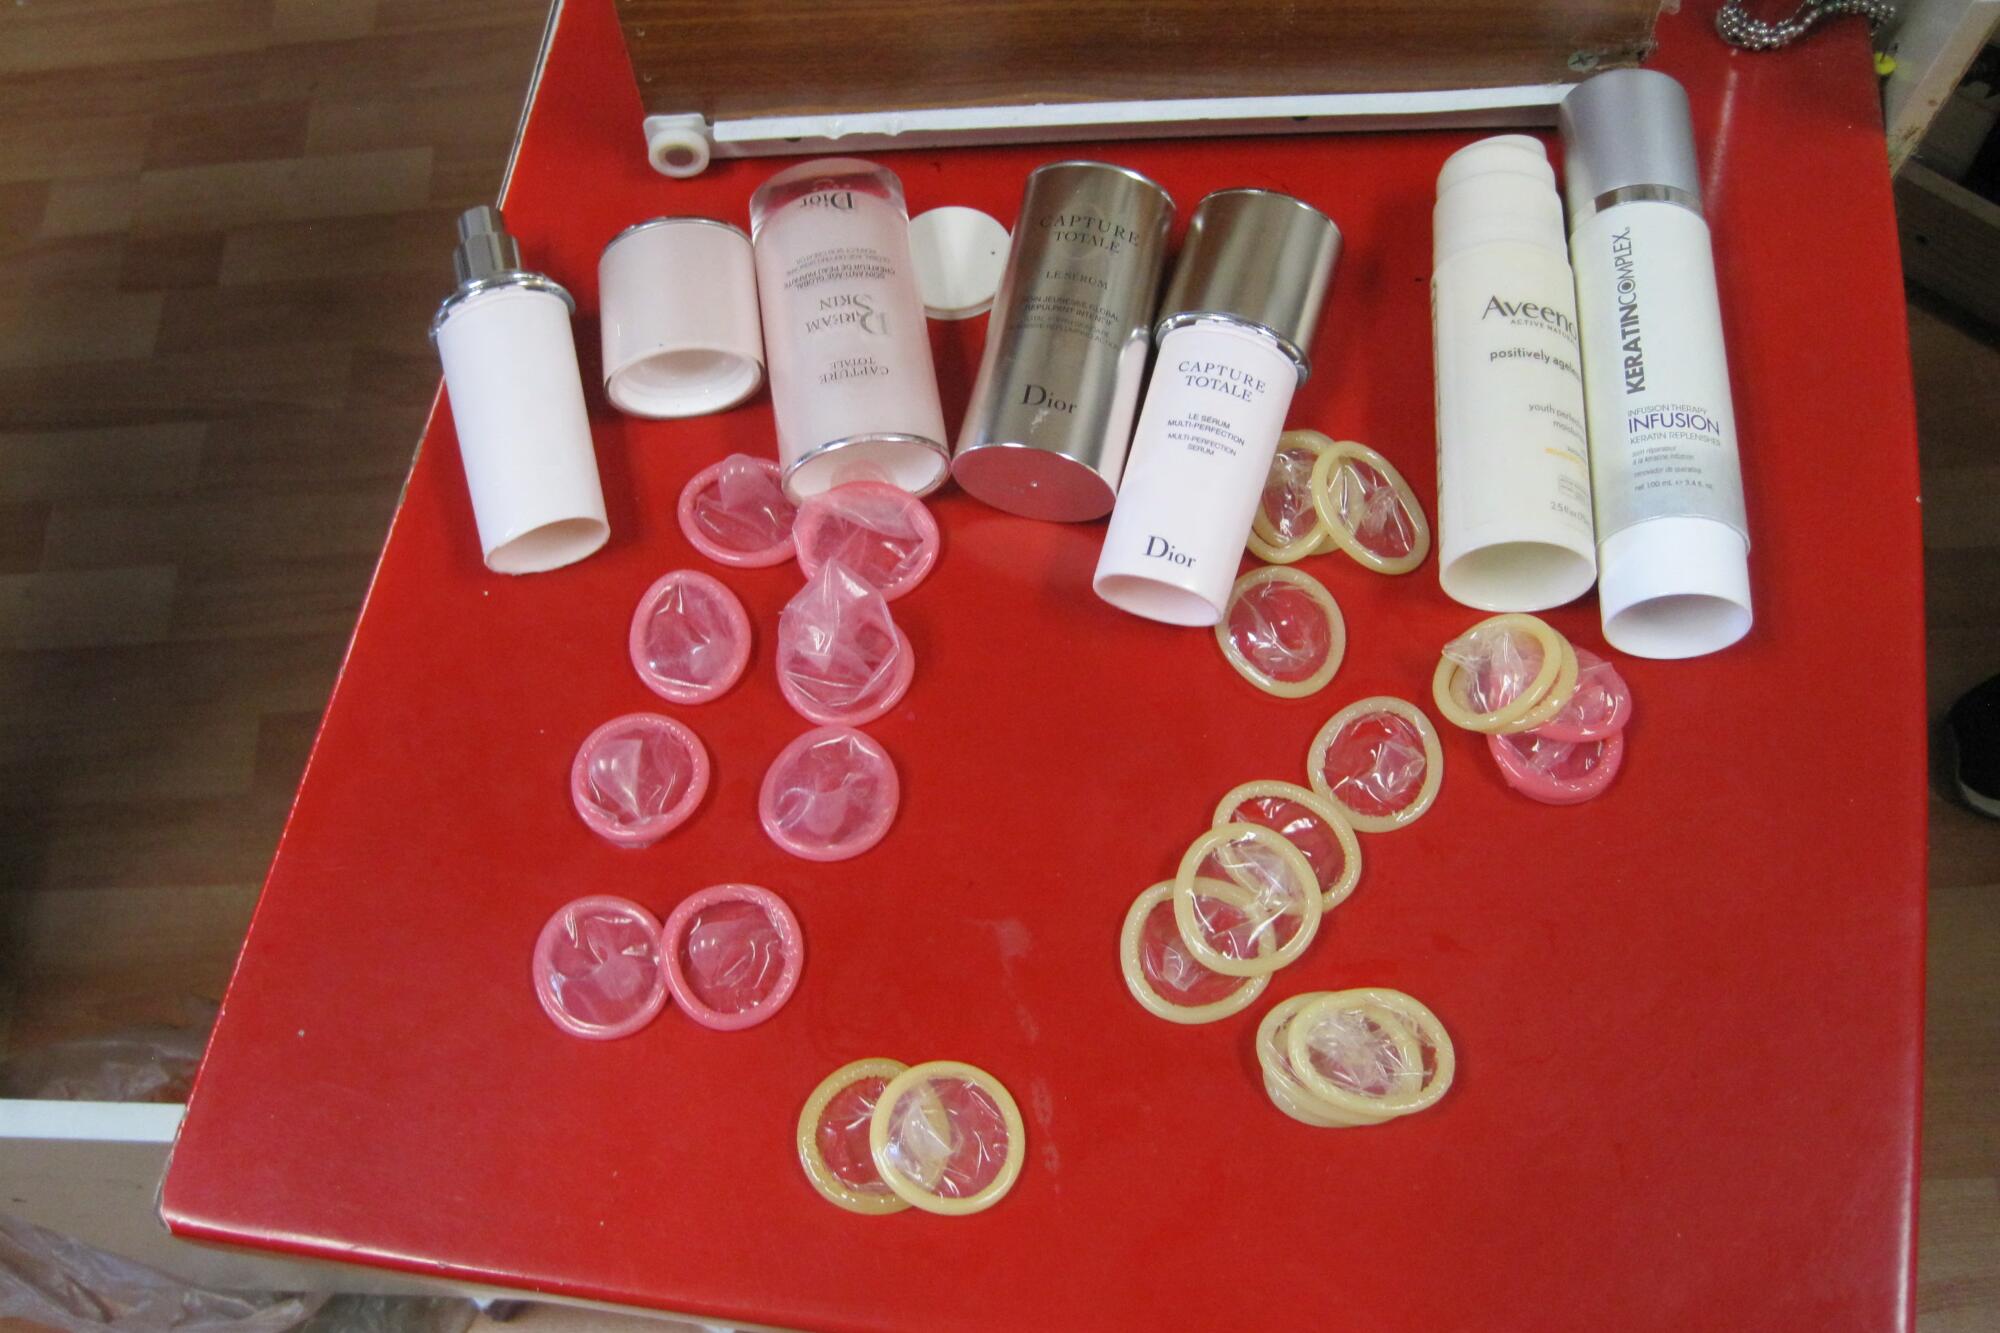 Condoms hidden in lotion bottles with false bottoms at one of Mei Xing's massage parlors.